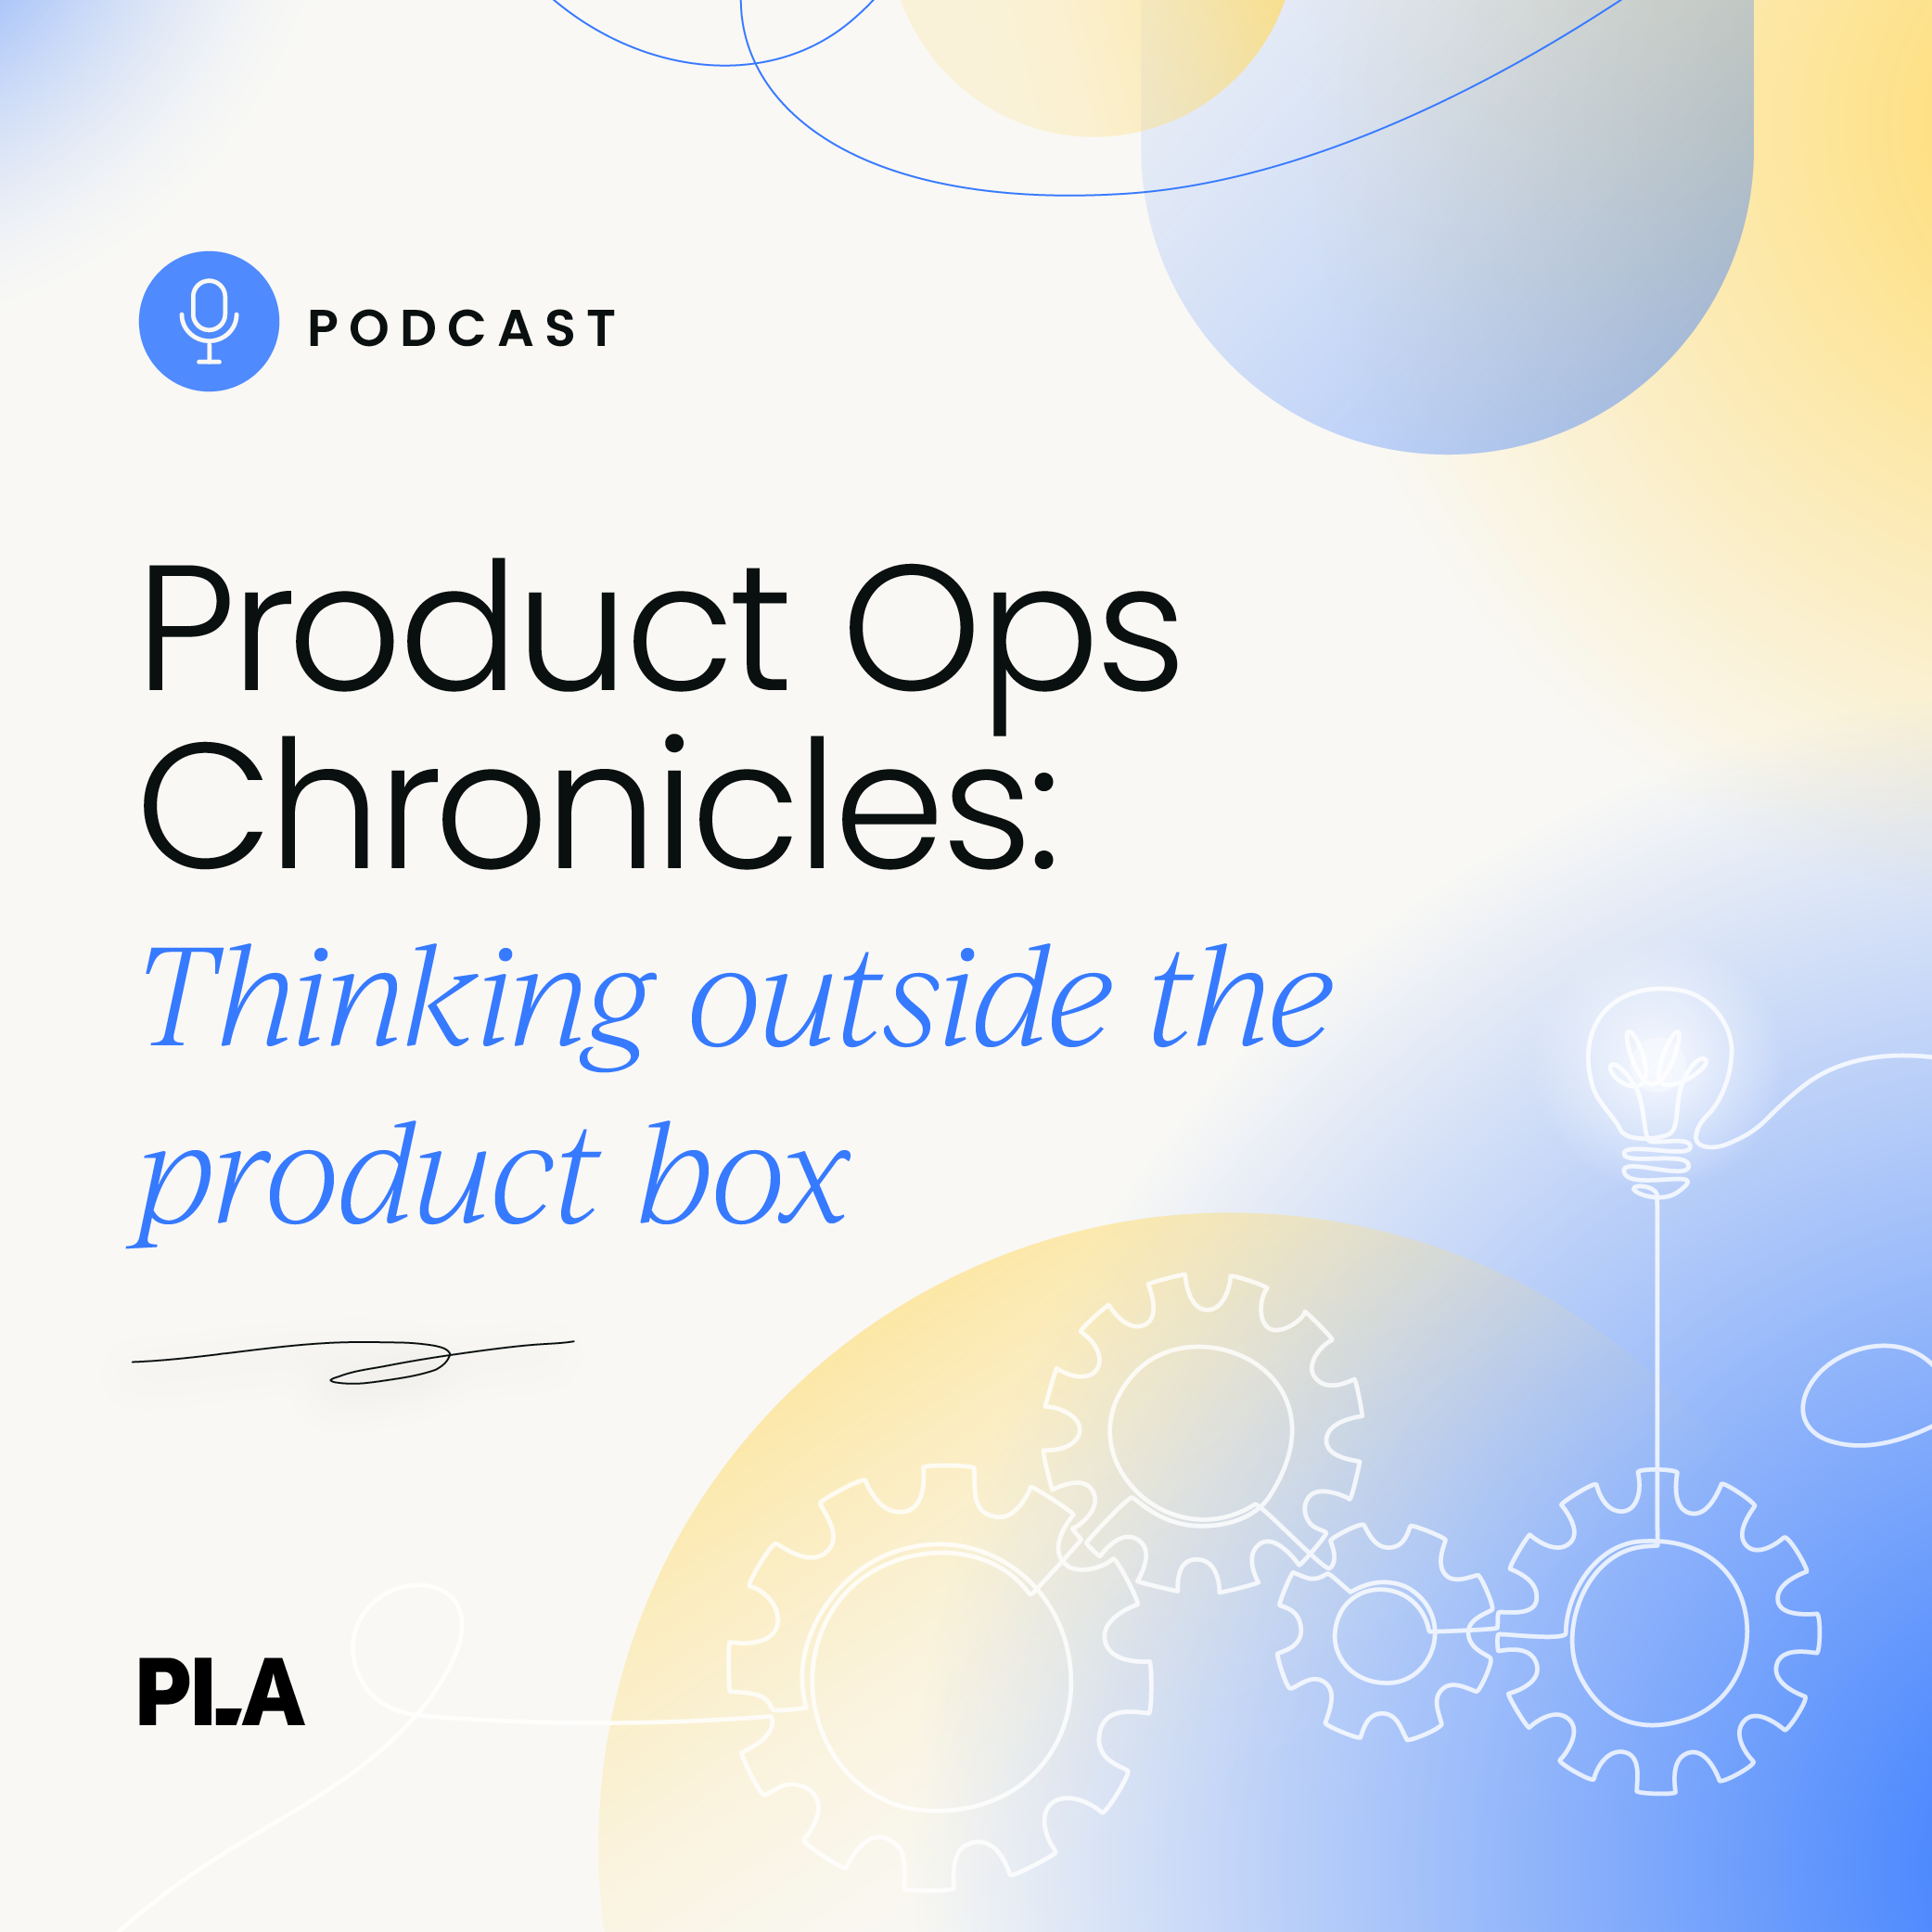 Product ops: Thinking outside the product box